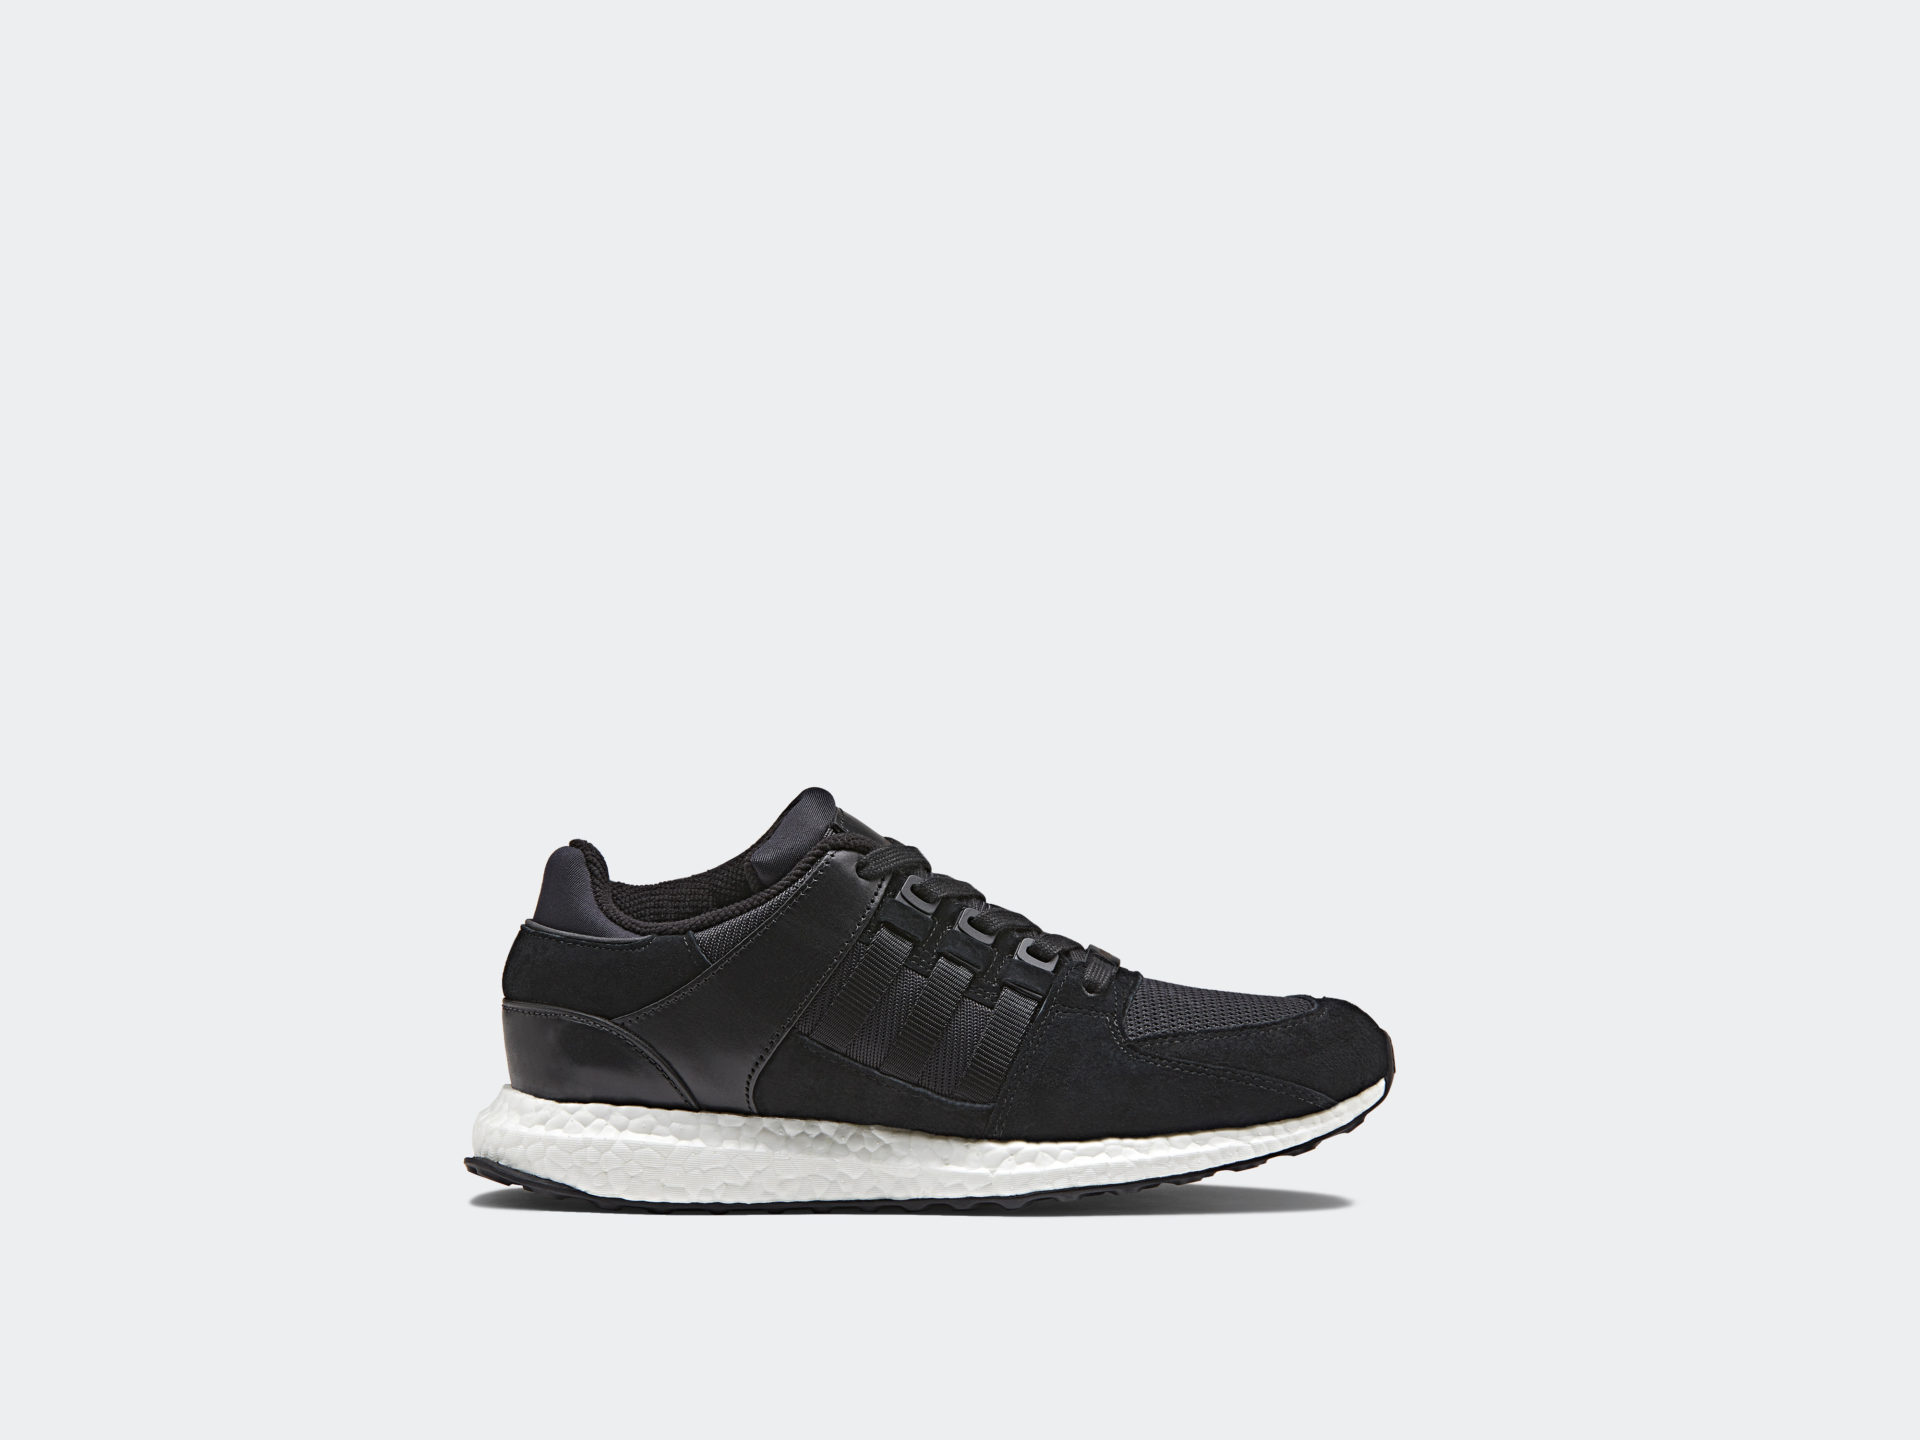 adidas EQT Support Ultra "Milled Leather"